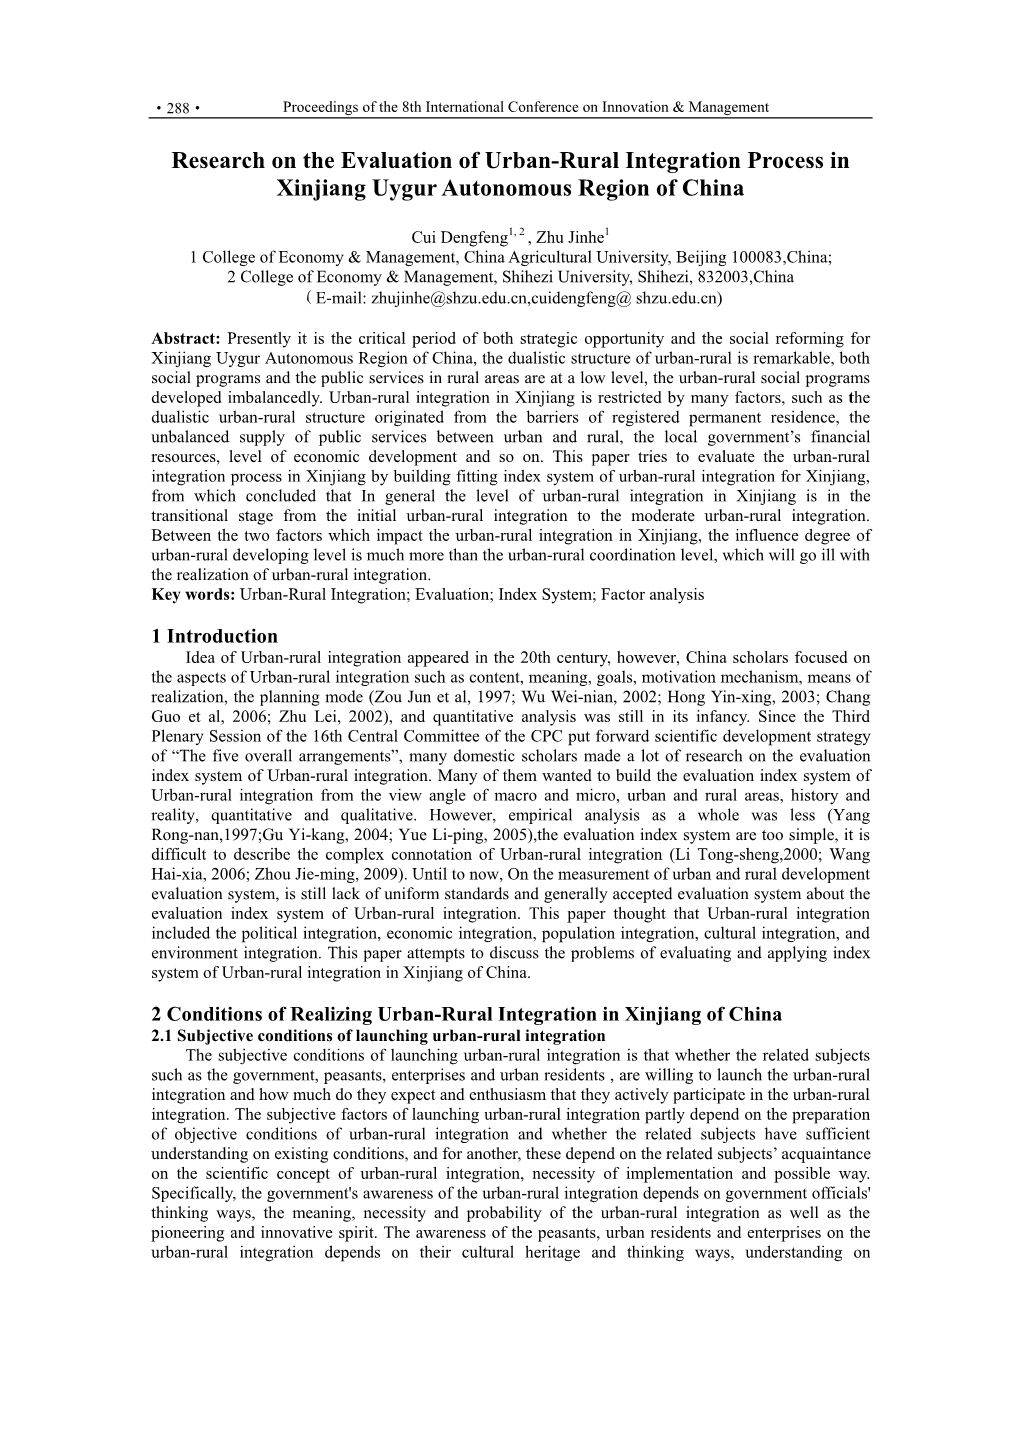 Research on the Evaluation of Urban-Rural Integration Process in Xinjiang Uygur Autonomous Region of China